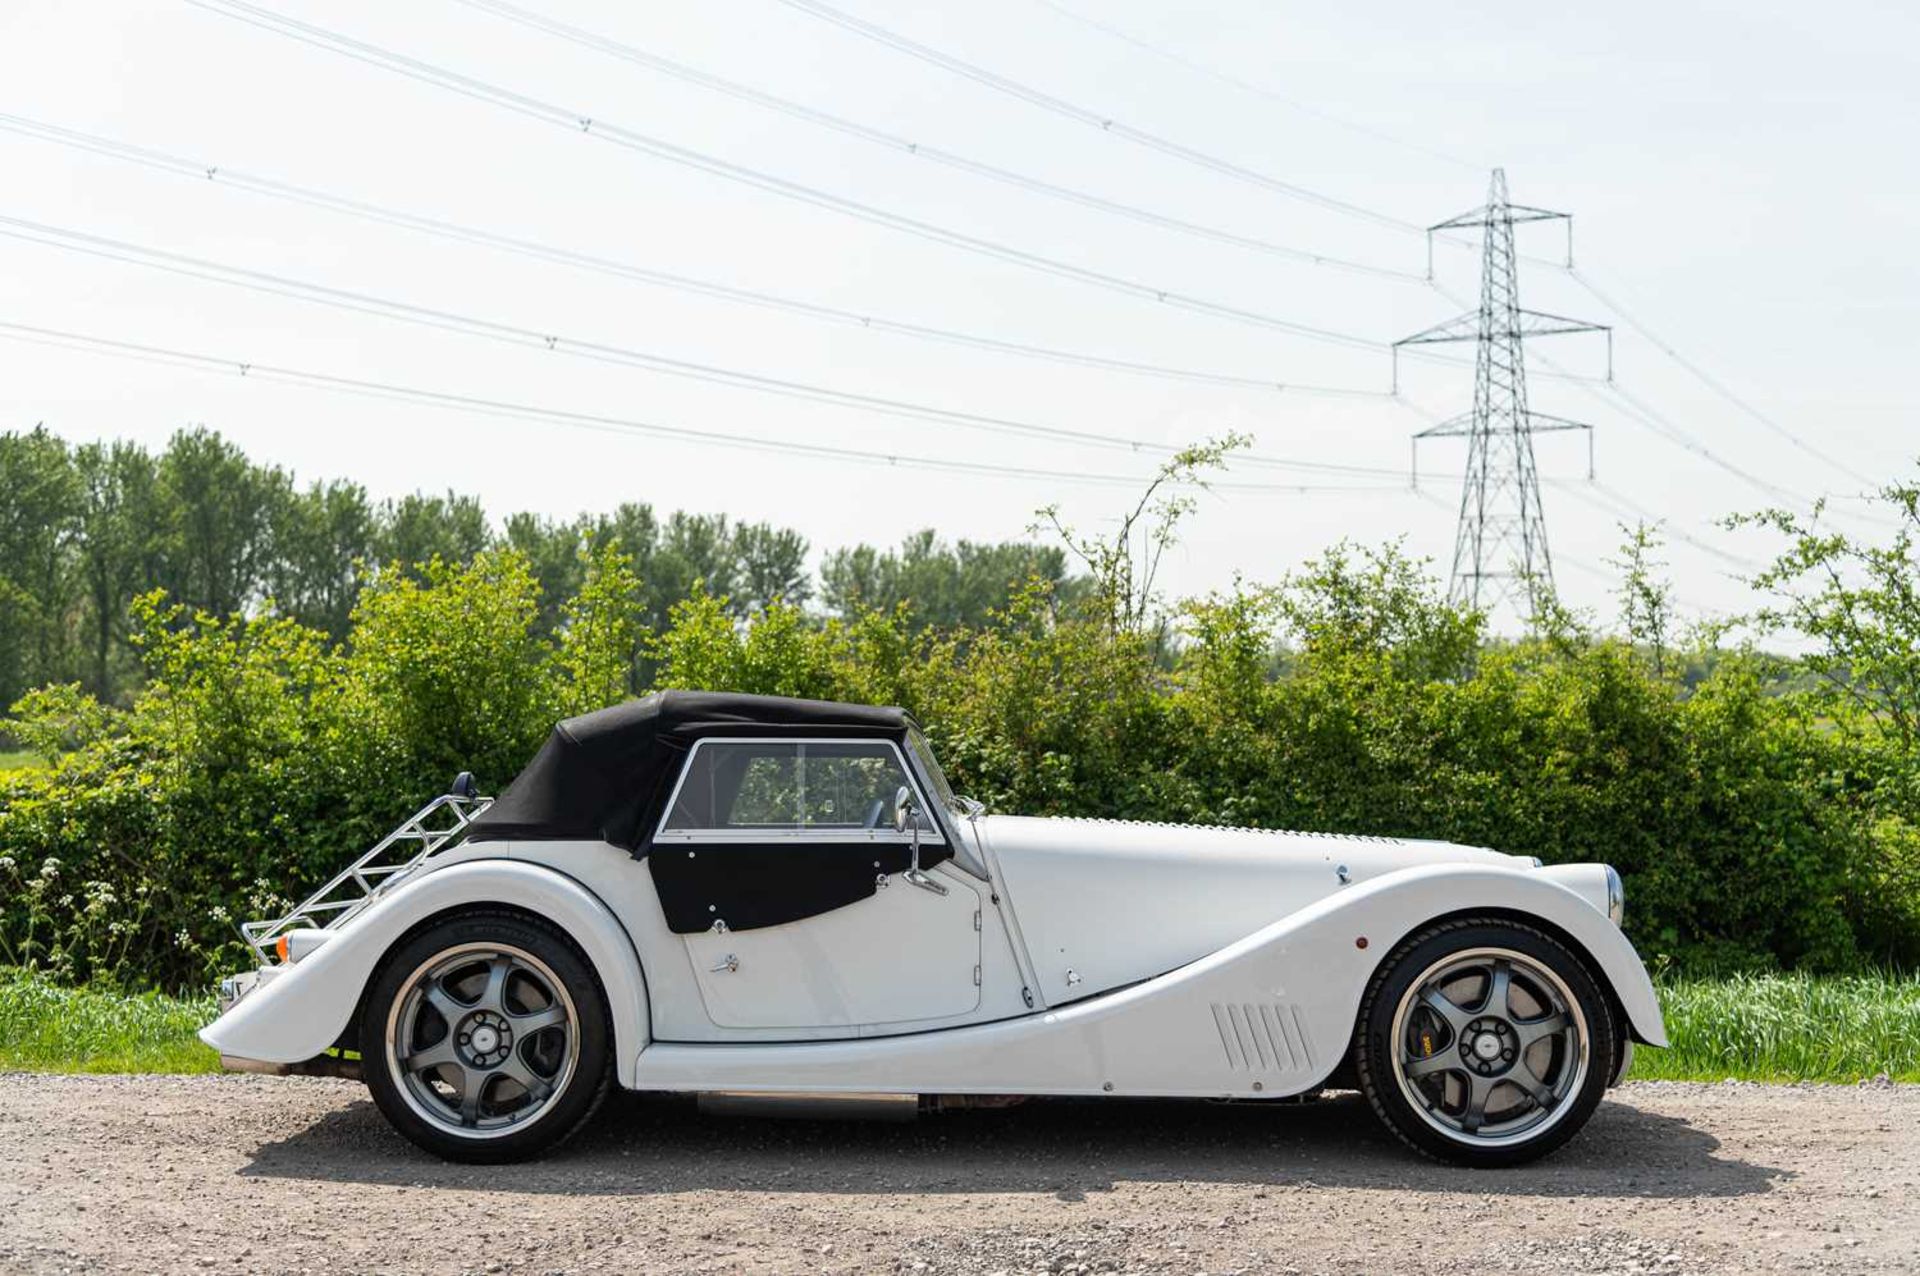 2012 Morgan Plus 8 ***NO RESERVE*** Believed to be one of just 60 produced and with MOT records supp - Image 18 of 74